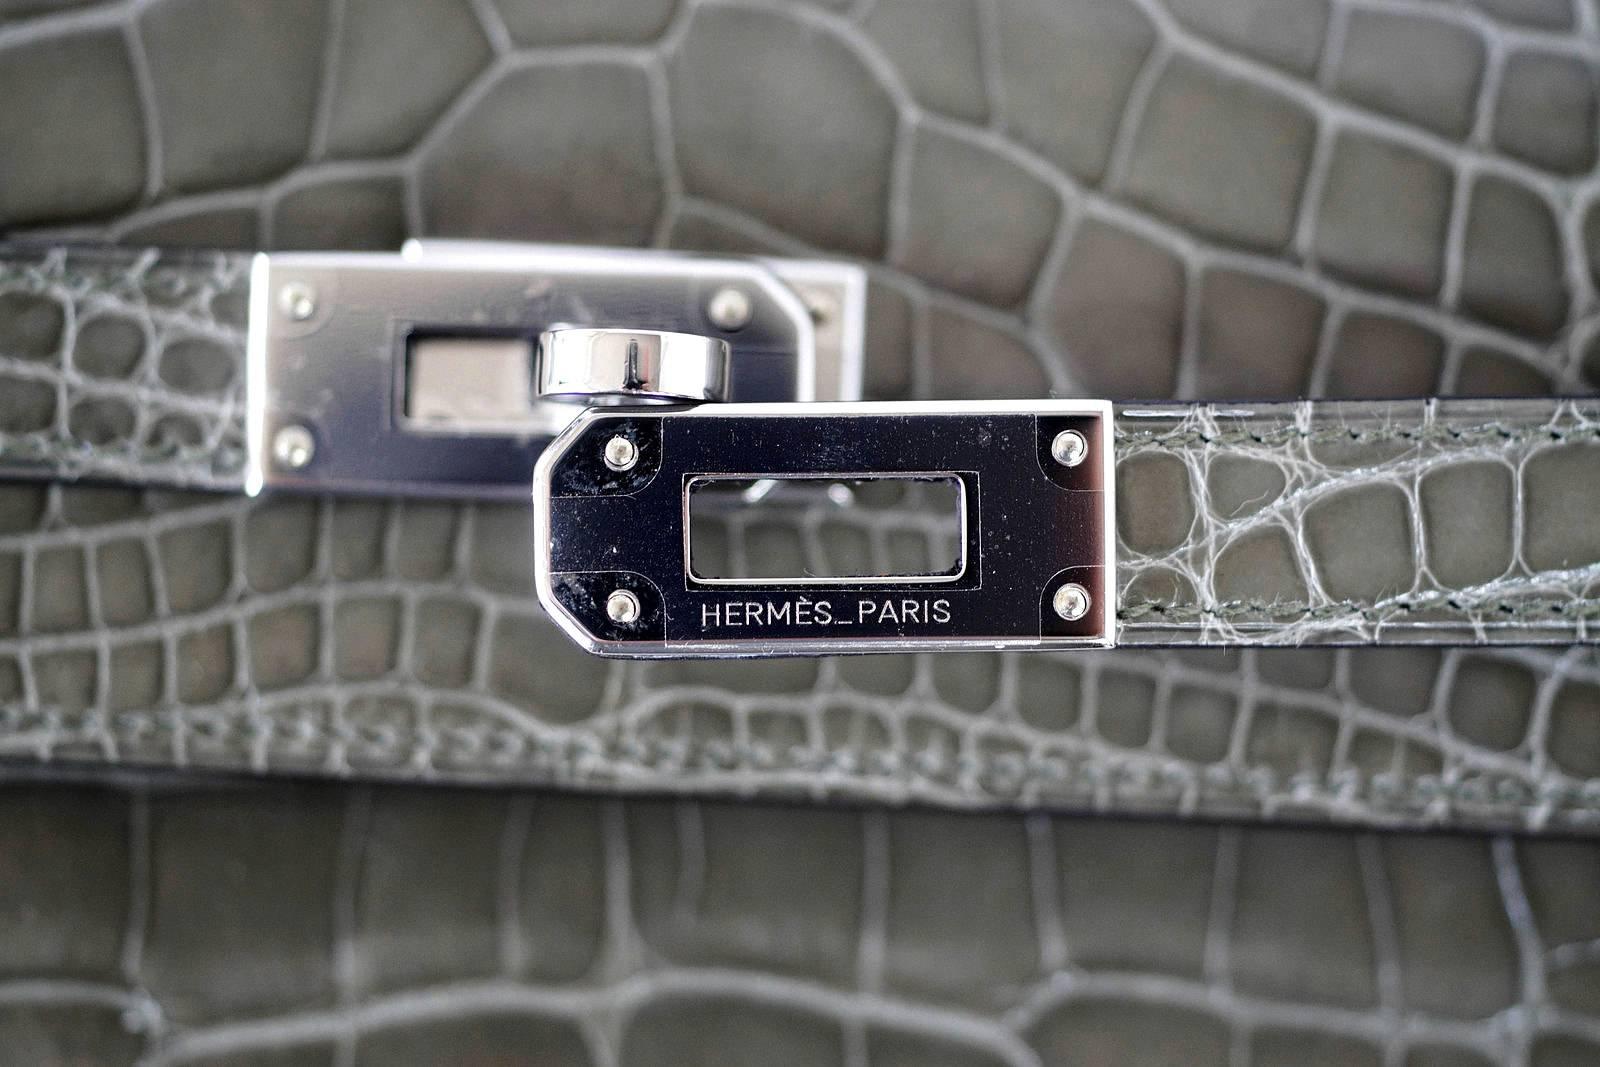 Guaranteed authentic extraordinarily beautiful Hermes Kelly Long wallet in coveted Gris Tourterelle Alligator.
This beauty is extremely rare and the colour is retired.
Often carried as a clutch.
Signature lock interior zipper pull.
Stamped HERMES